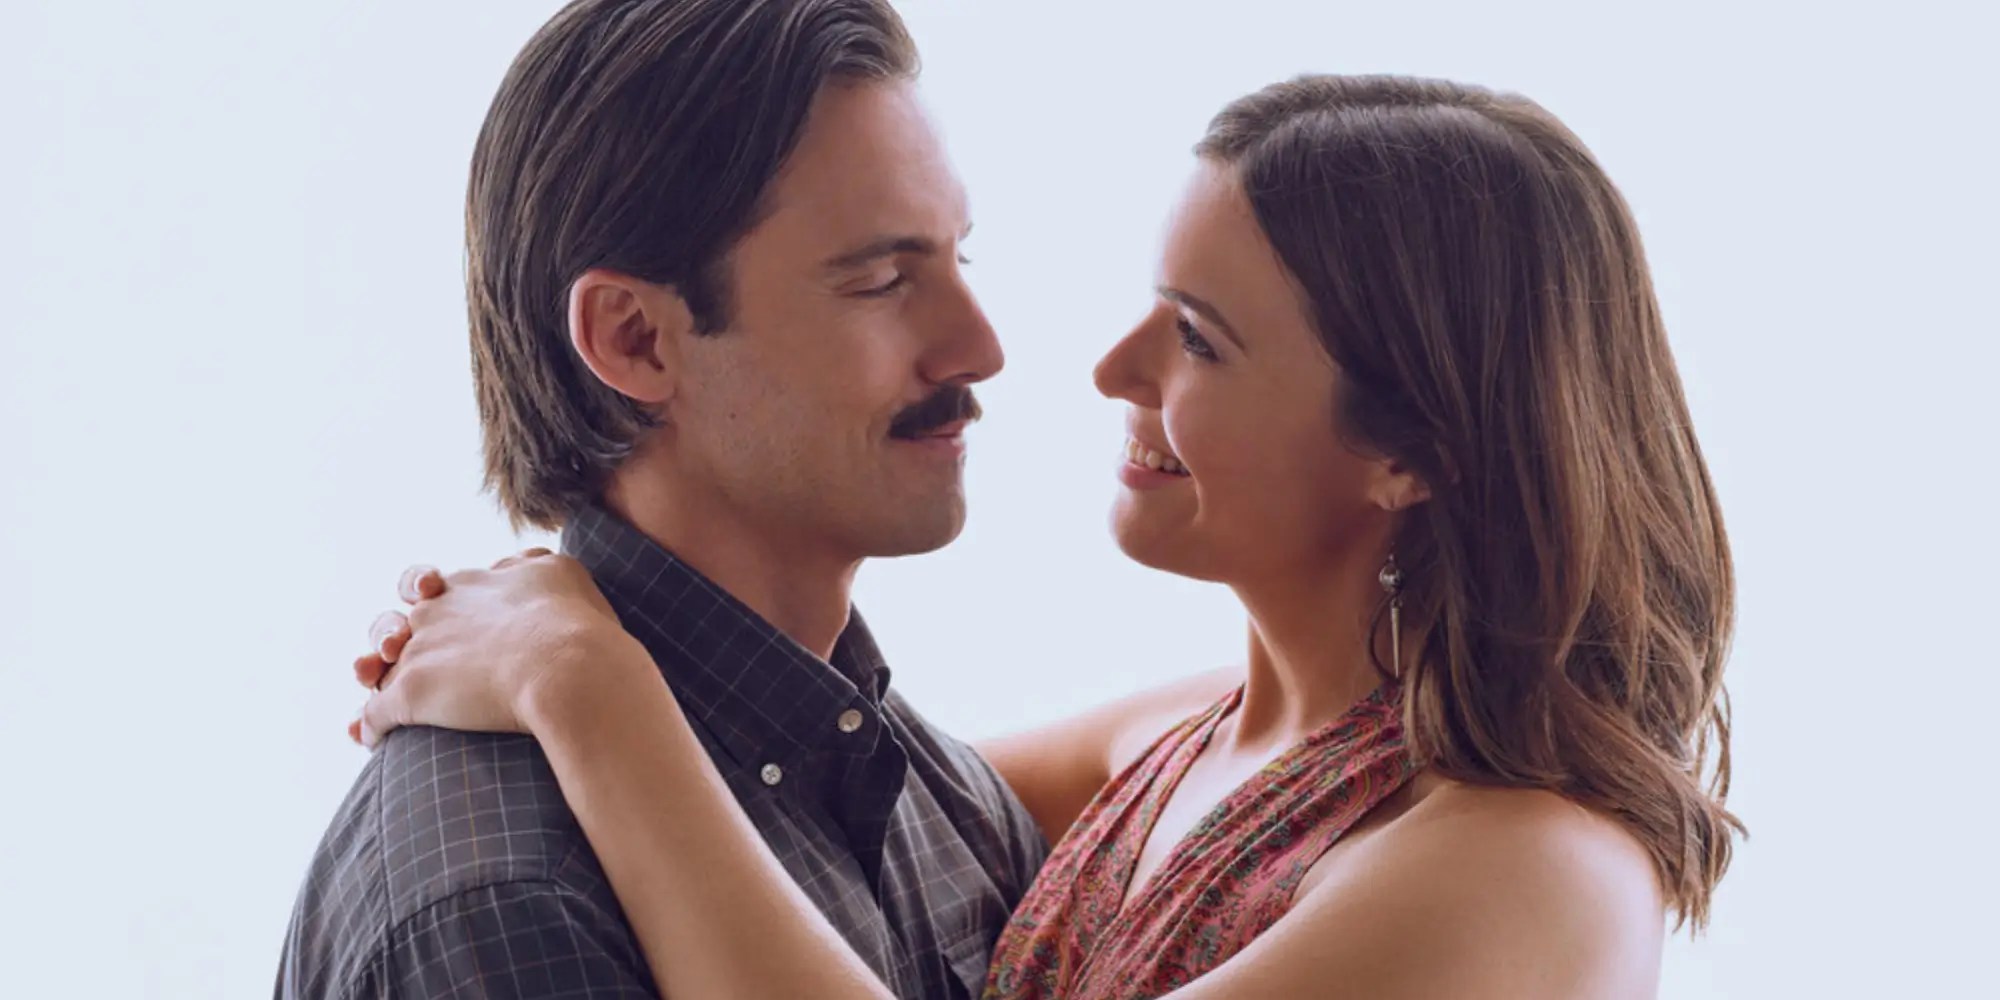 Milo Ventimiglia and Mandy Moore on the set of This Is Us.